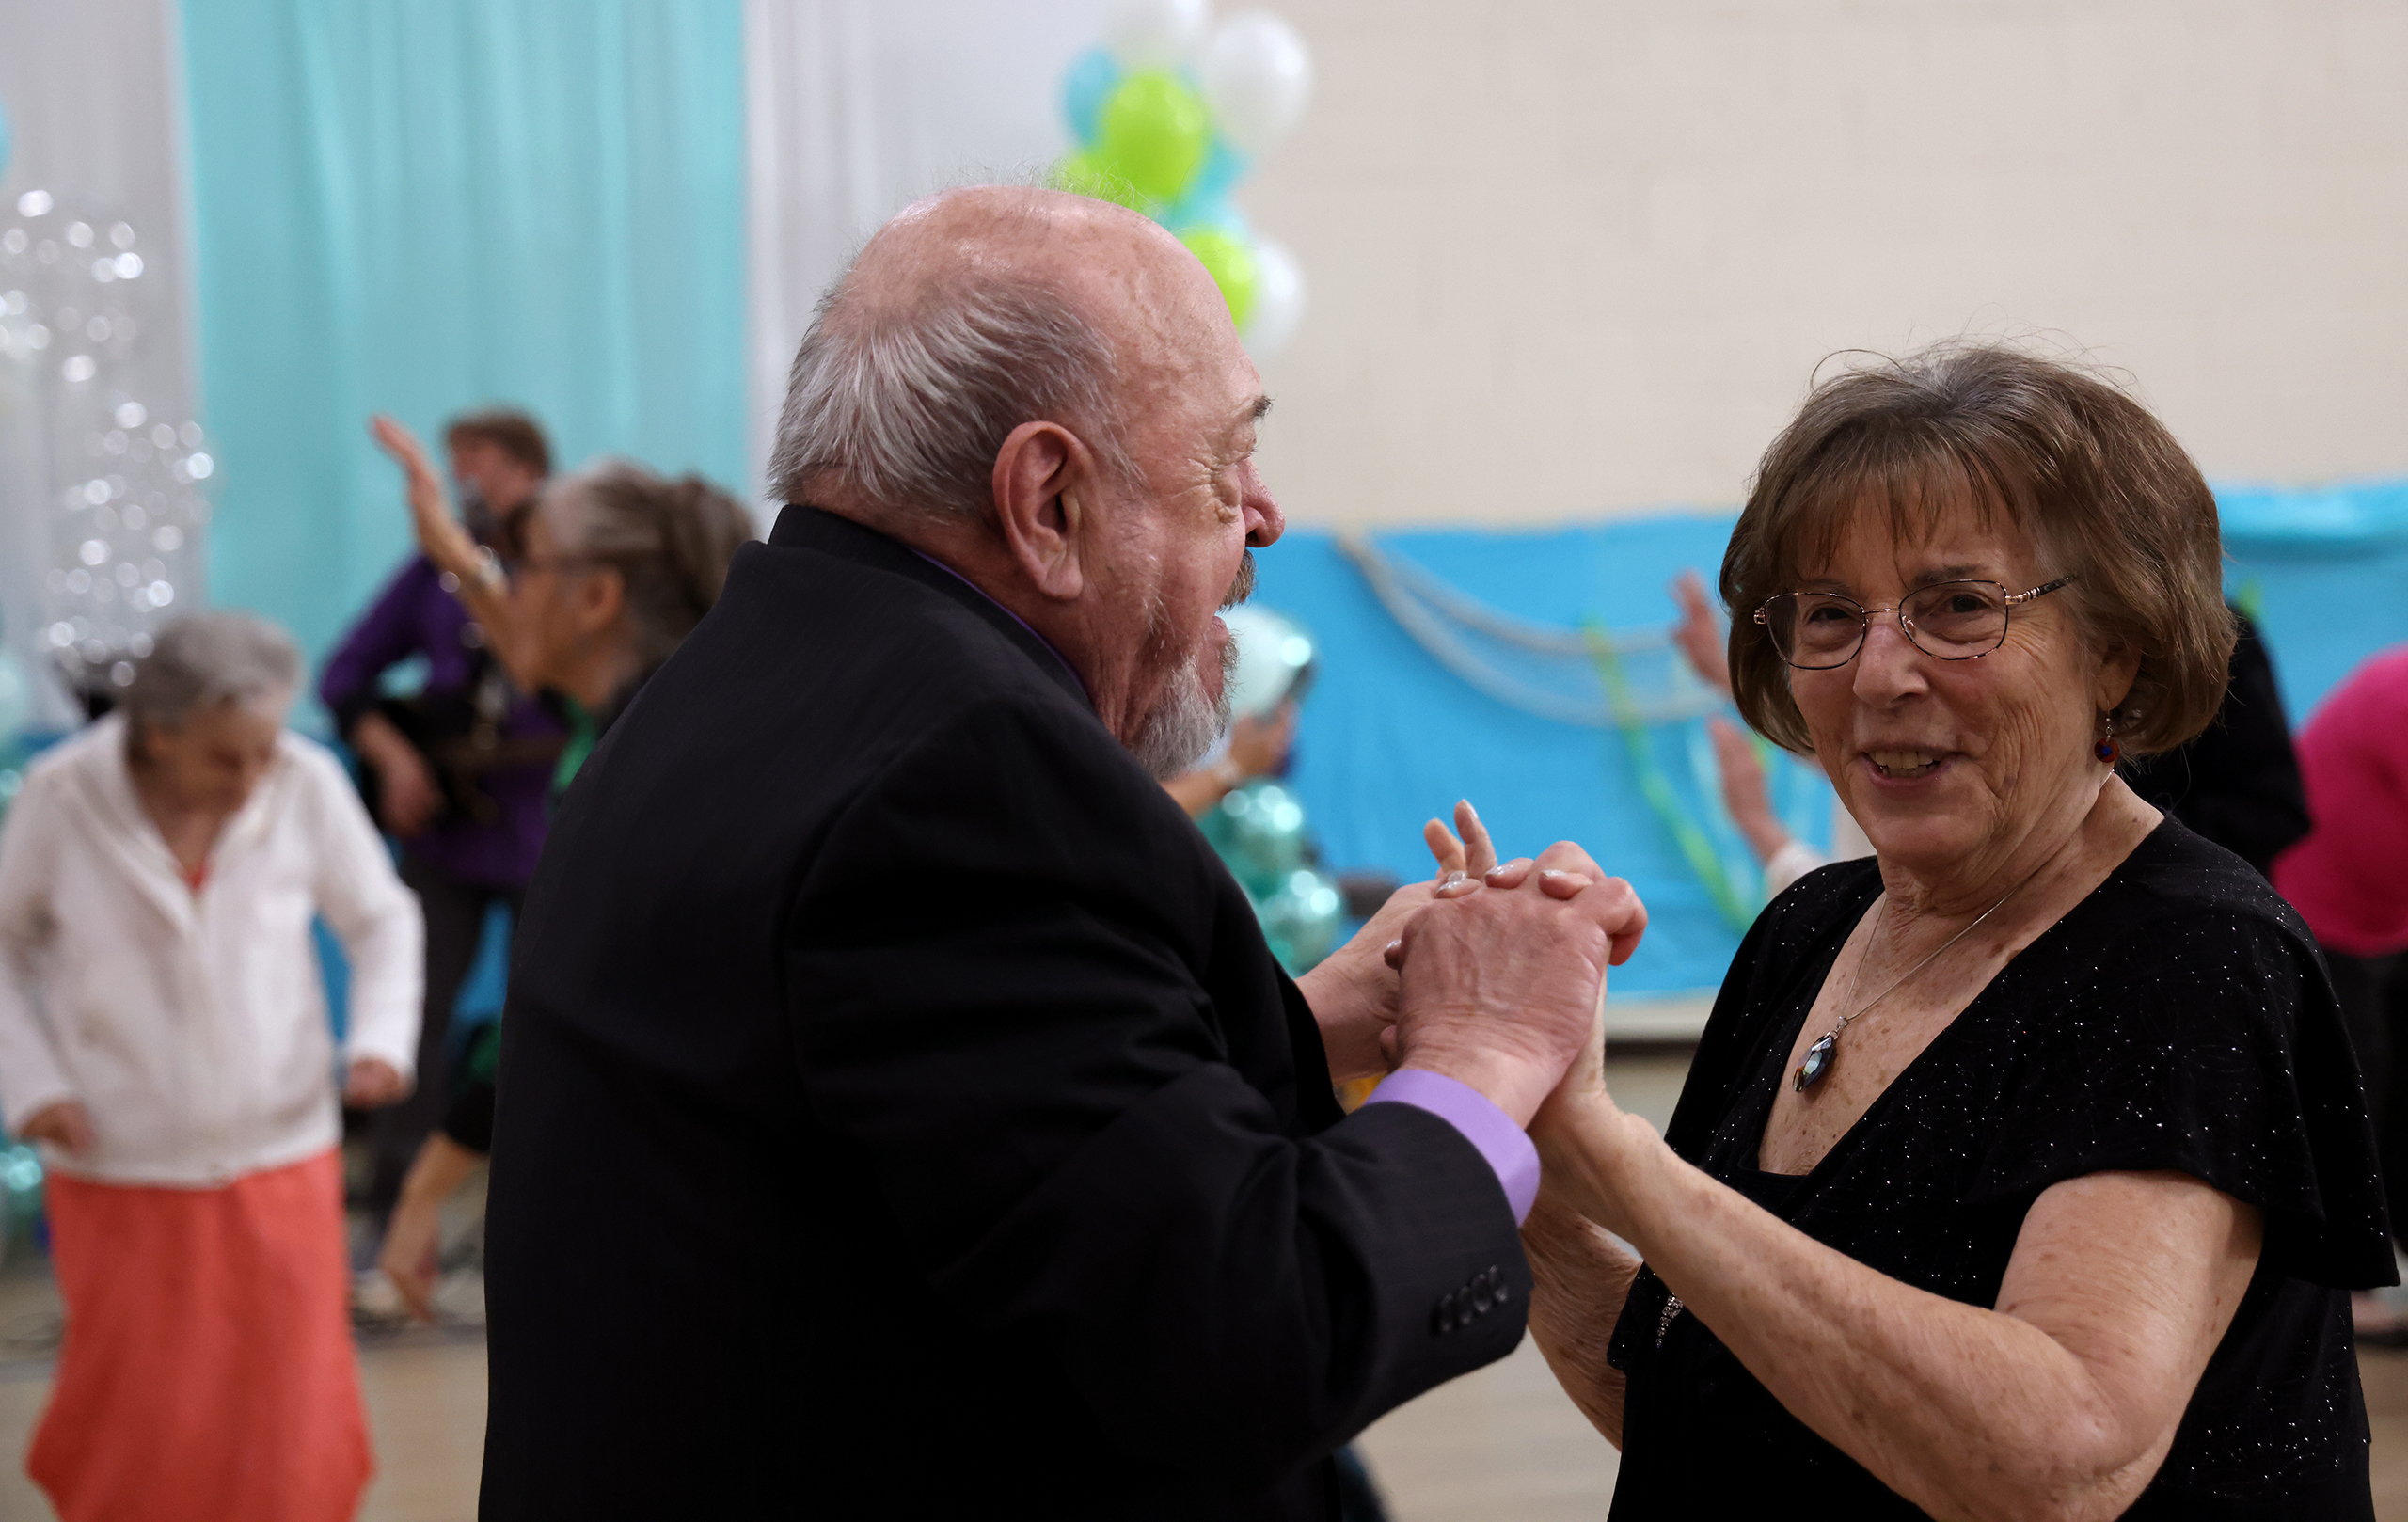 Elaine Galusha, right, dances with Bob Platek during a prom on Jan. 27. “These are vibrant-life communities,” said Kim Wood, director of wellness programming at Savanna House. (Photo by Kevinjonah Paguio/Cronkite News)
